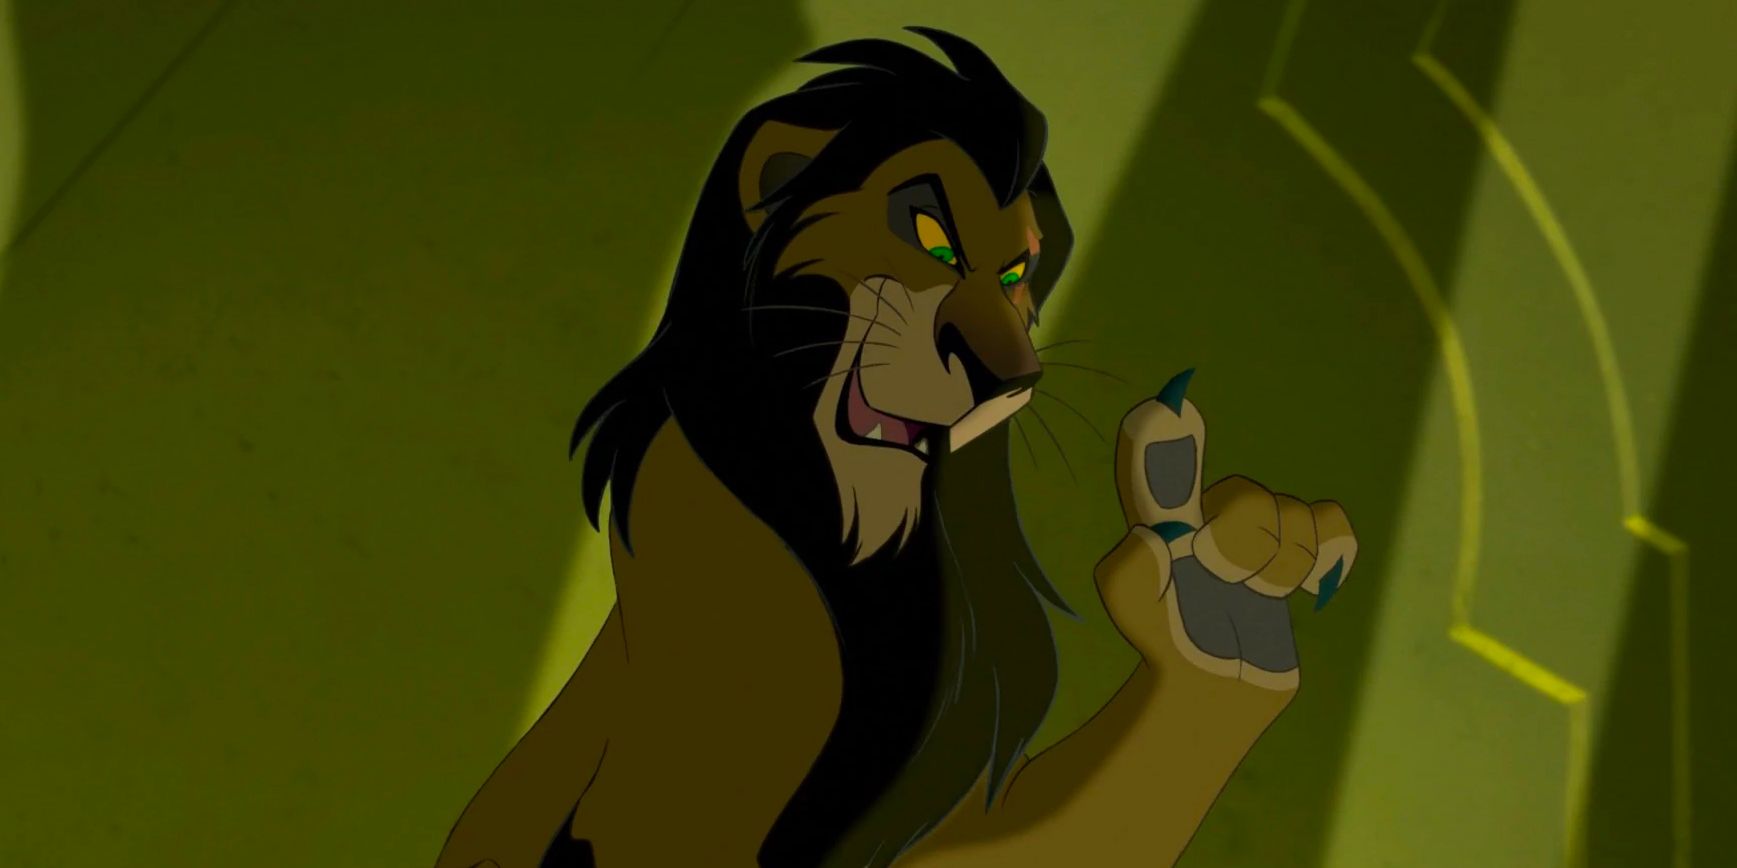 Scar in 1994's The Lion King